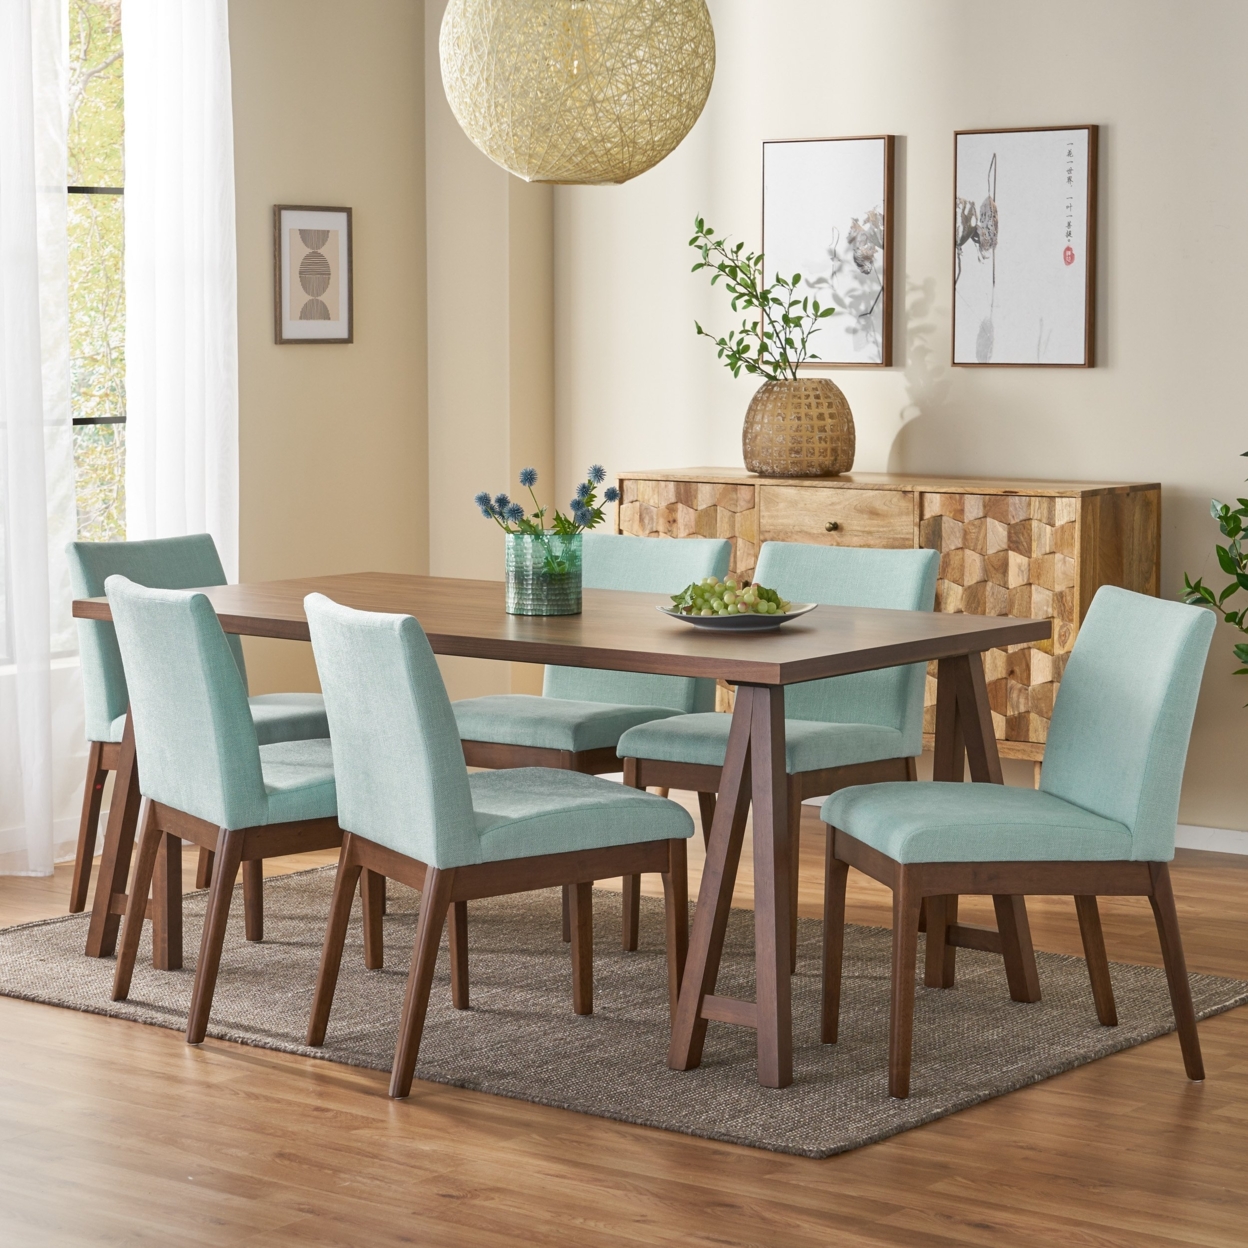 Elsinore Mid-Century Modern 7 Piece Dining Set With A-Frame Table - Mint/walnut